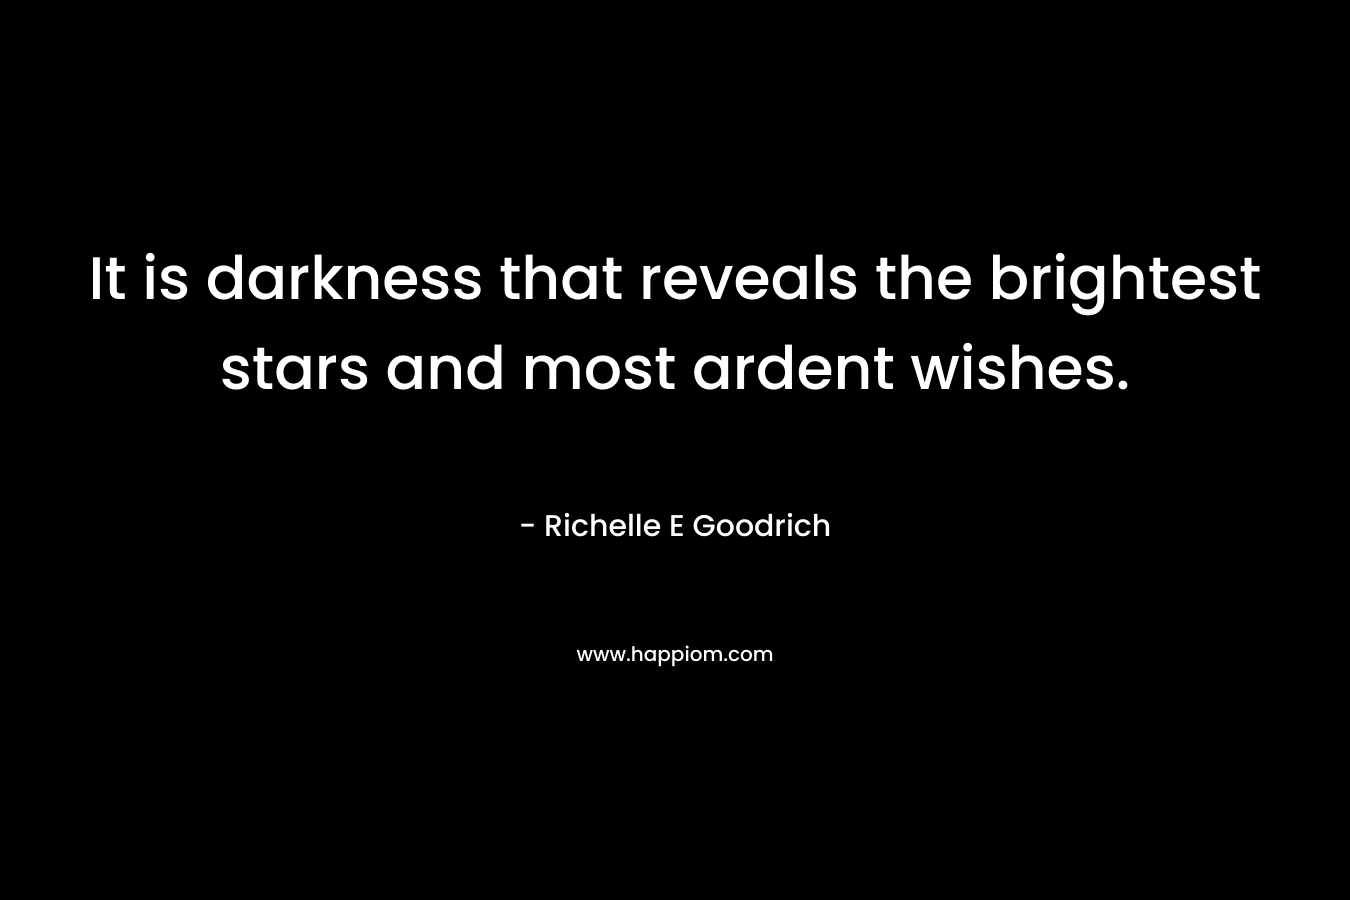 It is darkness that reveals the brightest stars and most ardent wishes.